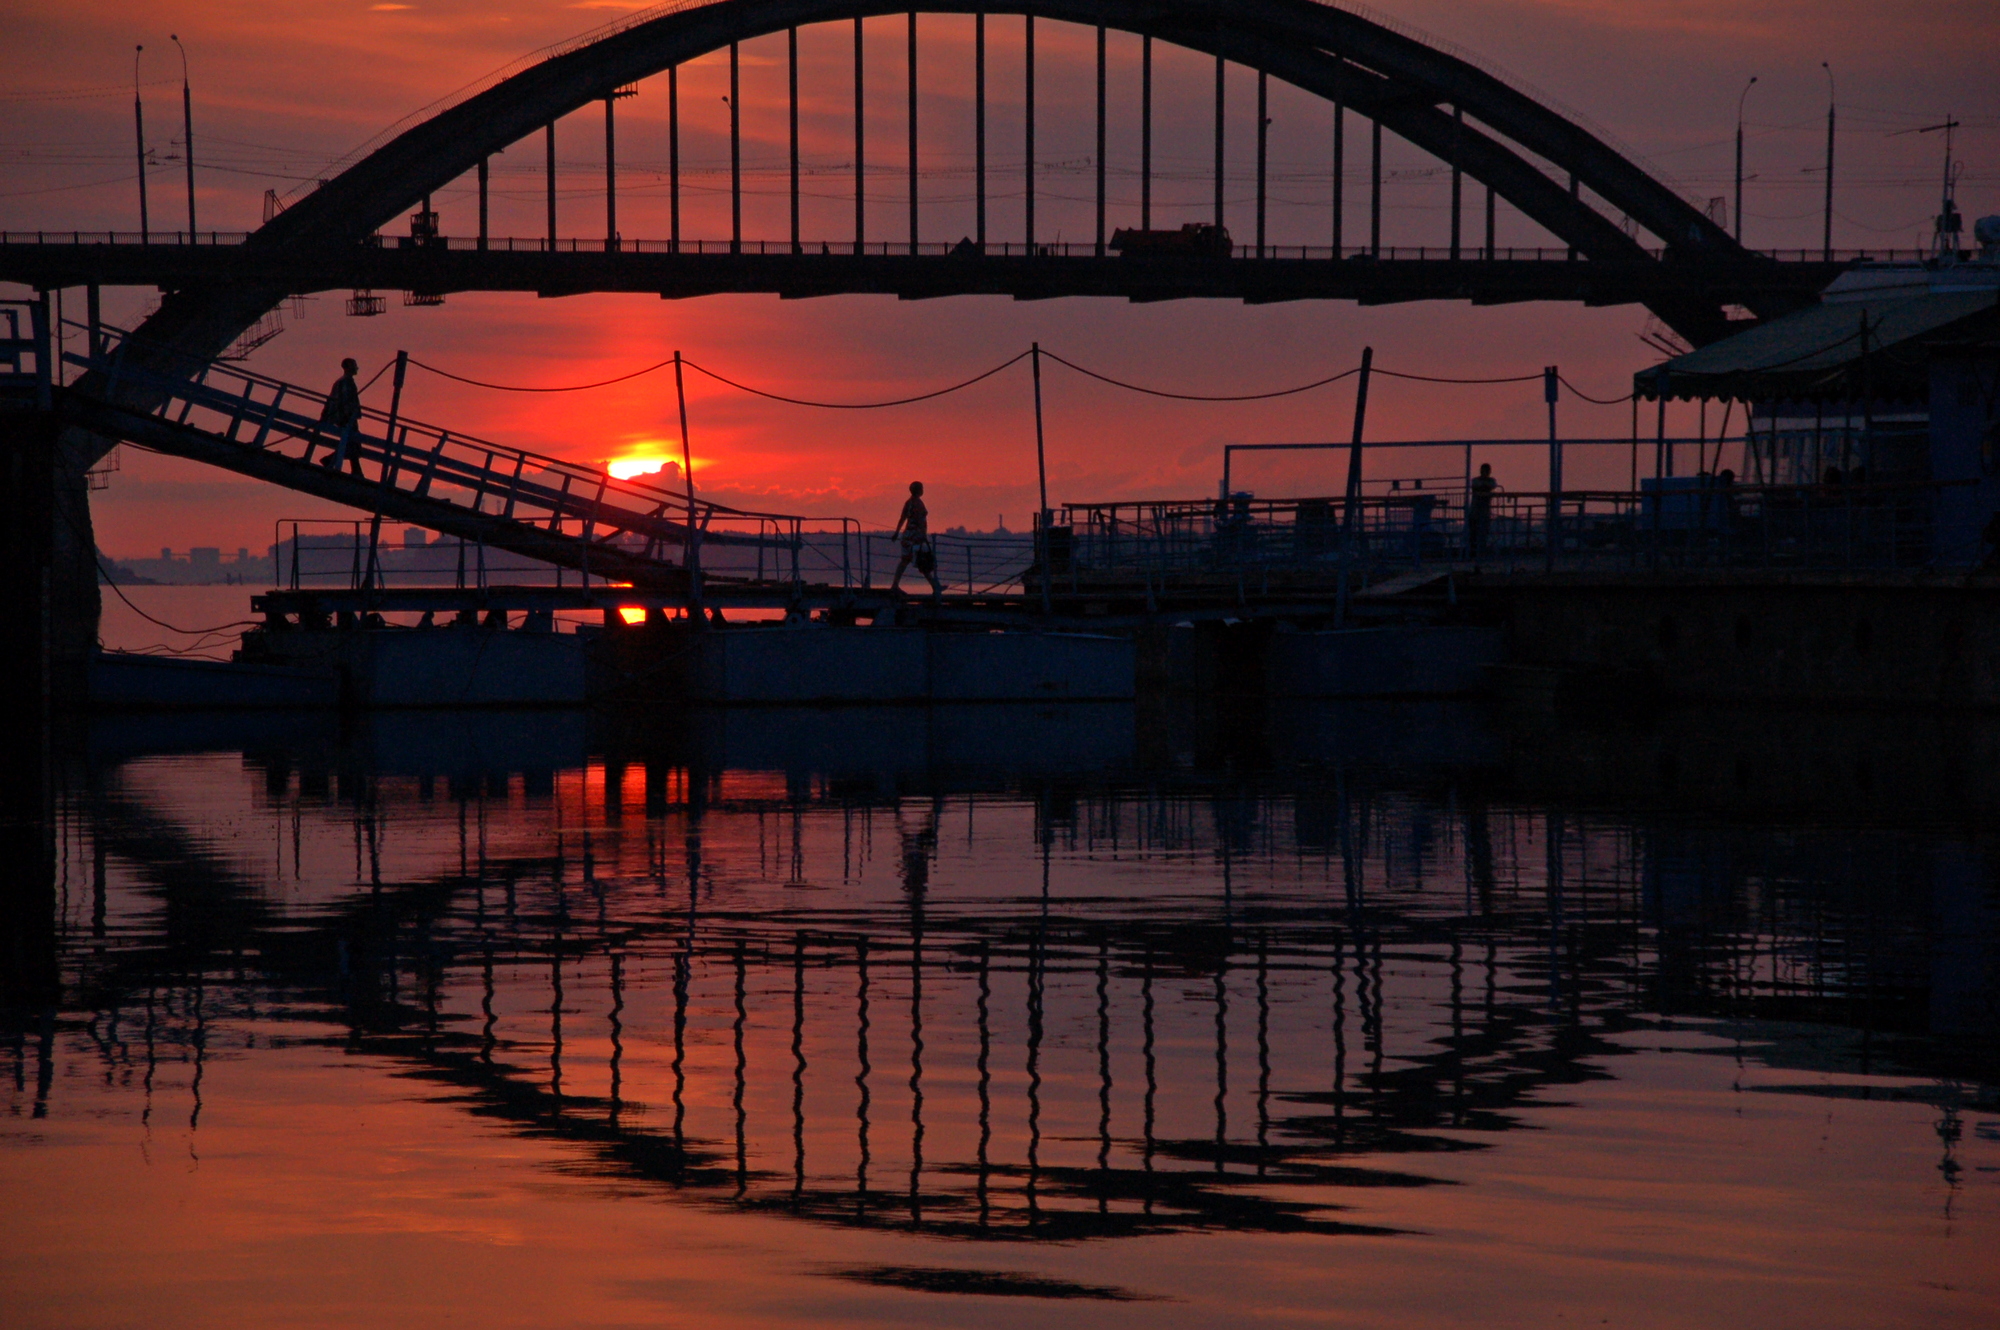 Architecture Building Photography Bridge River Reflection Sunset People Silhouette 2000x1330